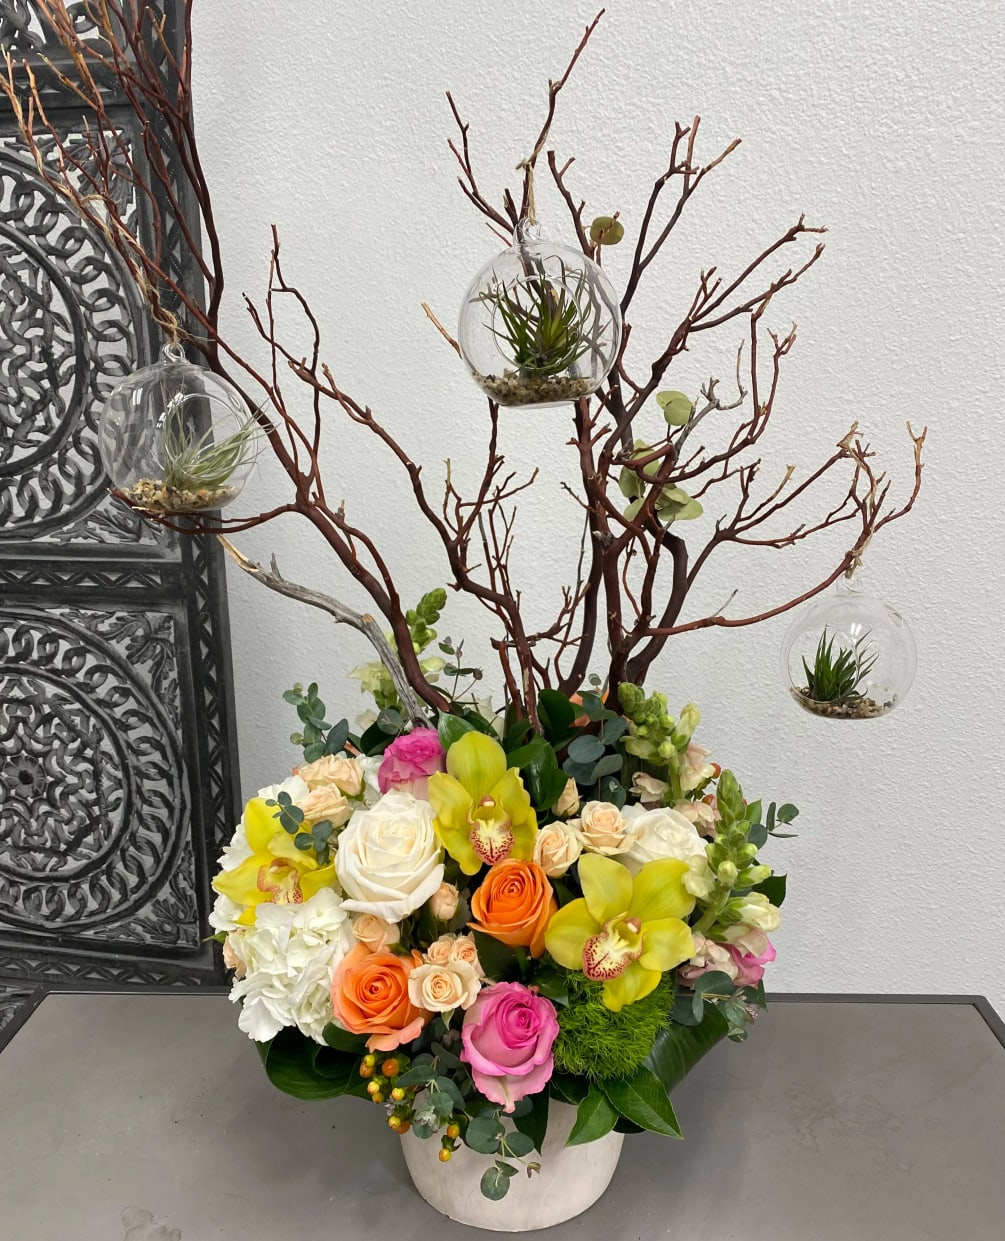 This arrangement includes a vibrant variety of flowers and a manzanita branch